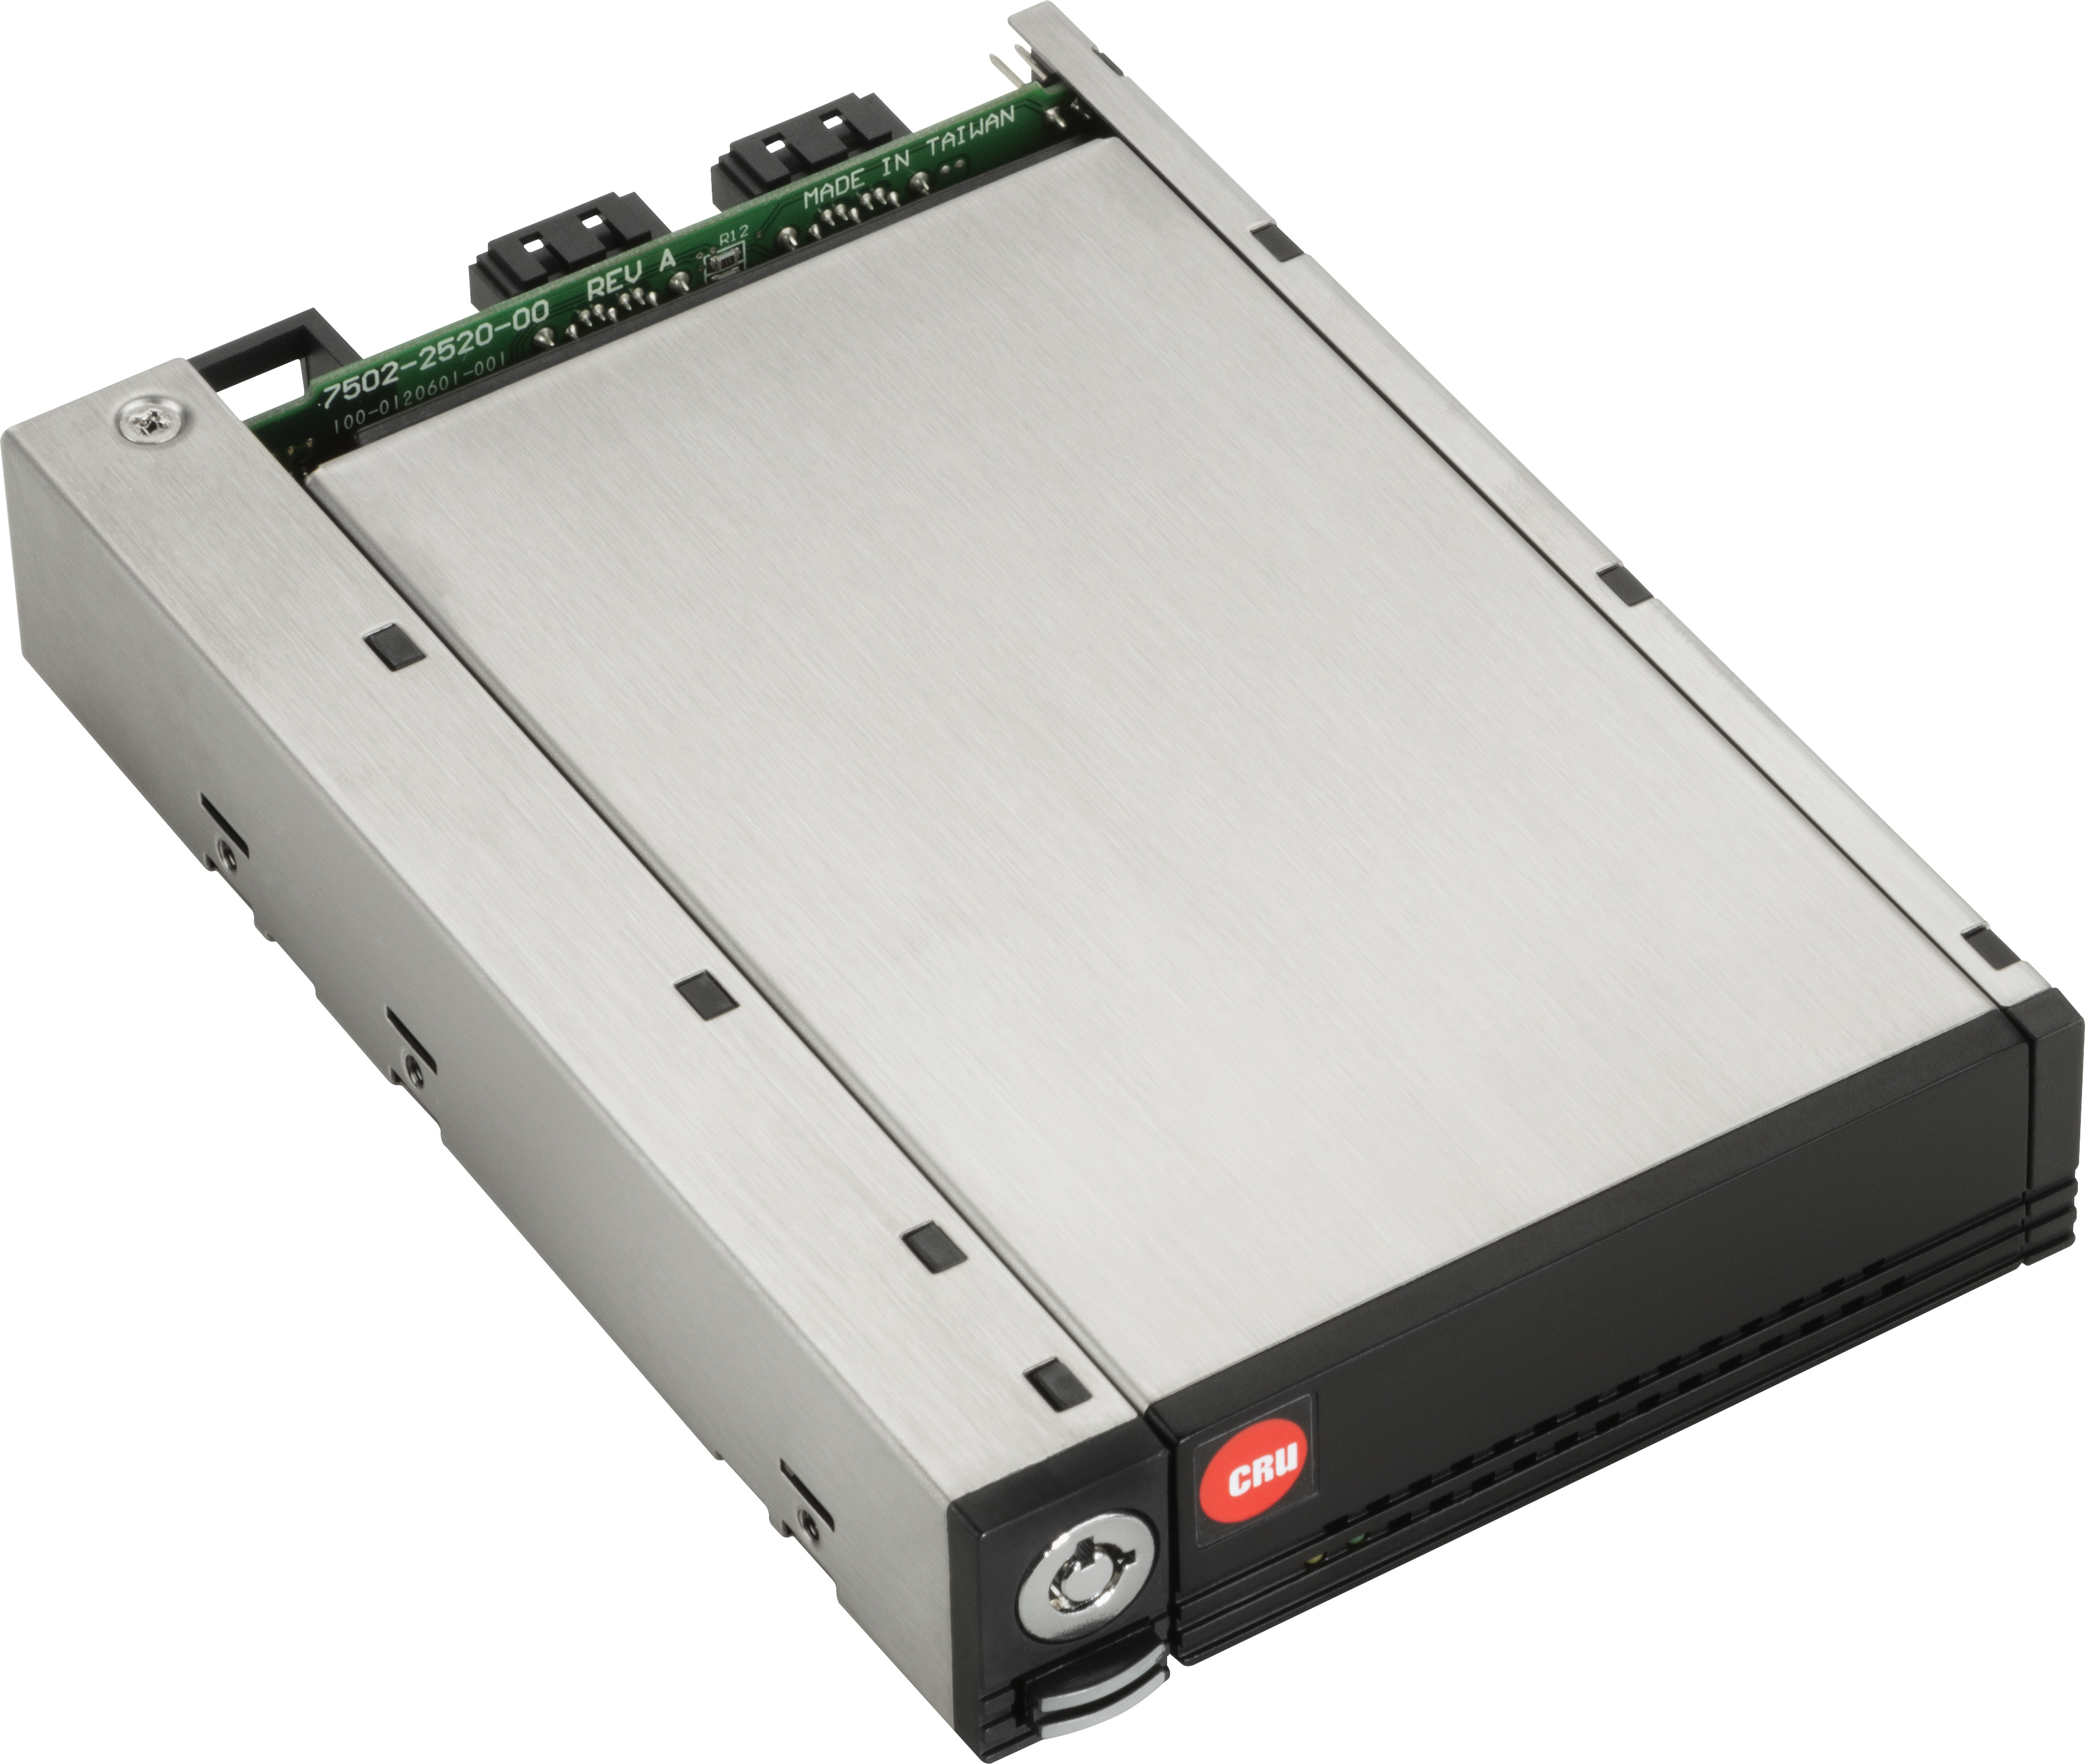 HP DP25 Removable HDD Frame/Carrier (W3J84AA)